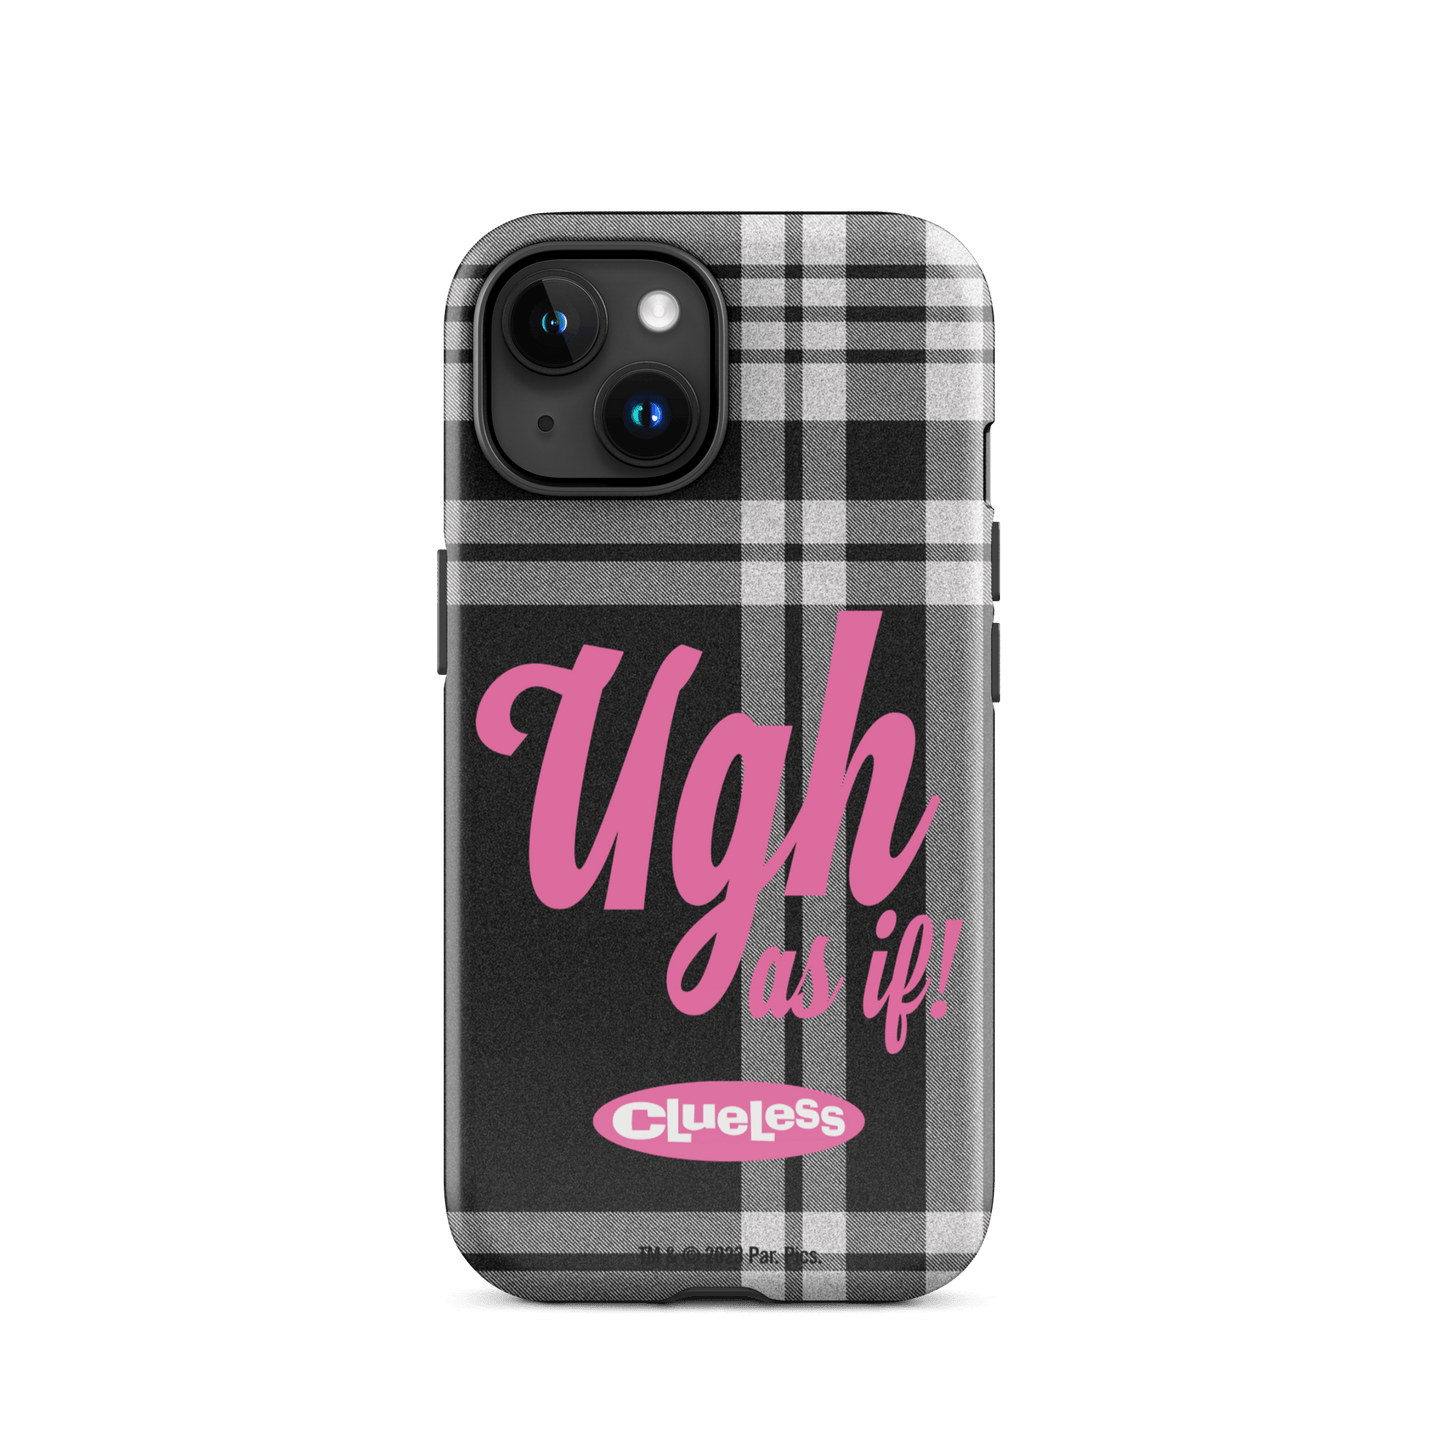 Clueless Ugh As If Tough Case for iPhone - Paramount Shop